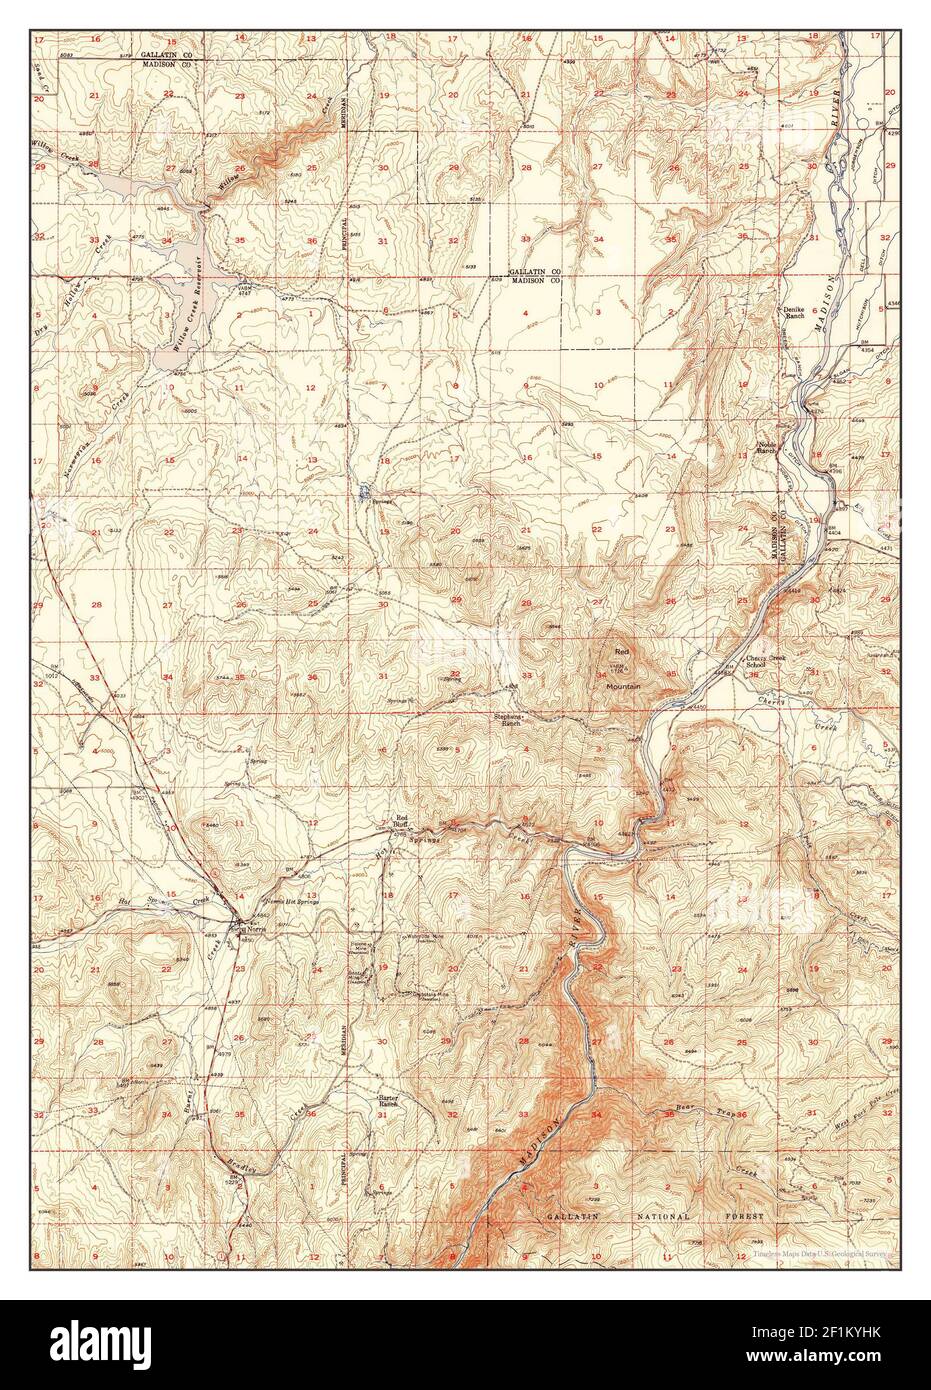 Norris, Montana, map 1951, 1:62500, United States of America by Timeless Maps, data U.S. Geological Survey Stock Photo